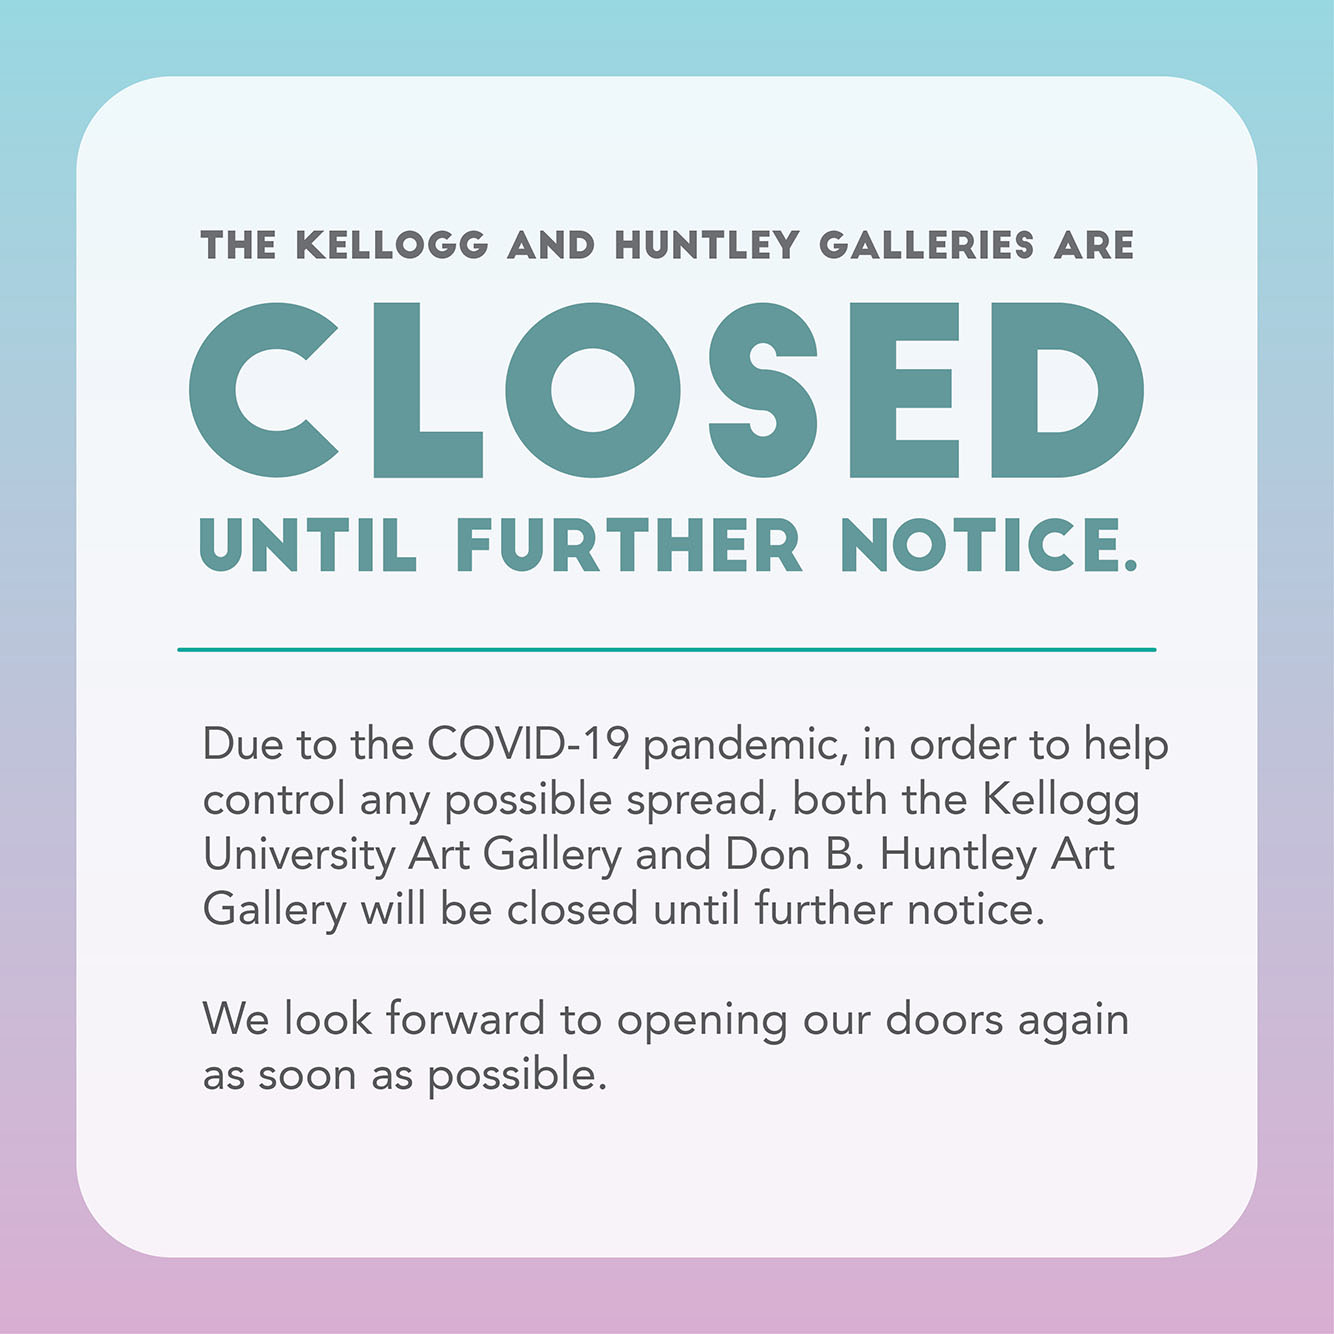 Blue and purple graphic with dark teal and grey text reads: Due to the COVID-19 pandemic, and in order to help control any possible spread, both the Kellogg University Art Gallery and the Don B. Huntley Gallery will be closed until further notice.  We look forward to opening our doors again as soon as possible.